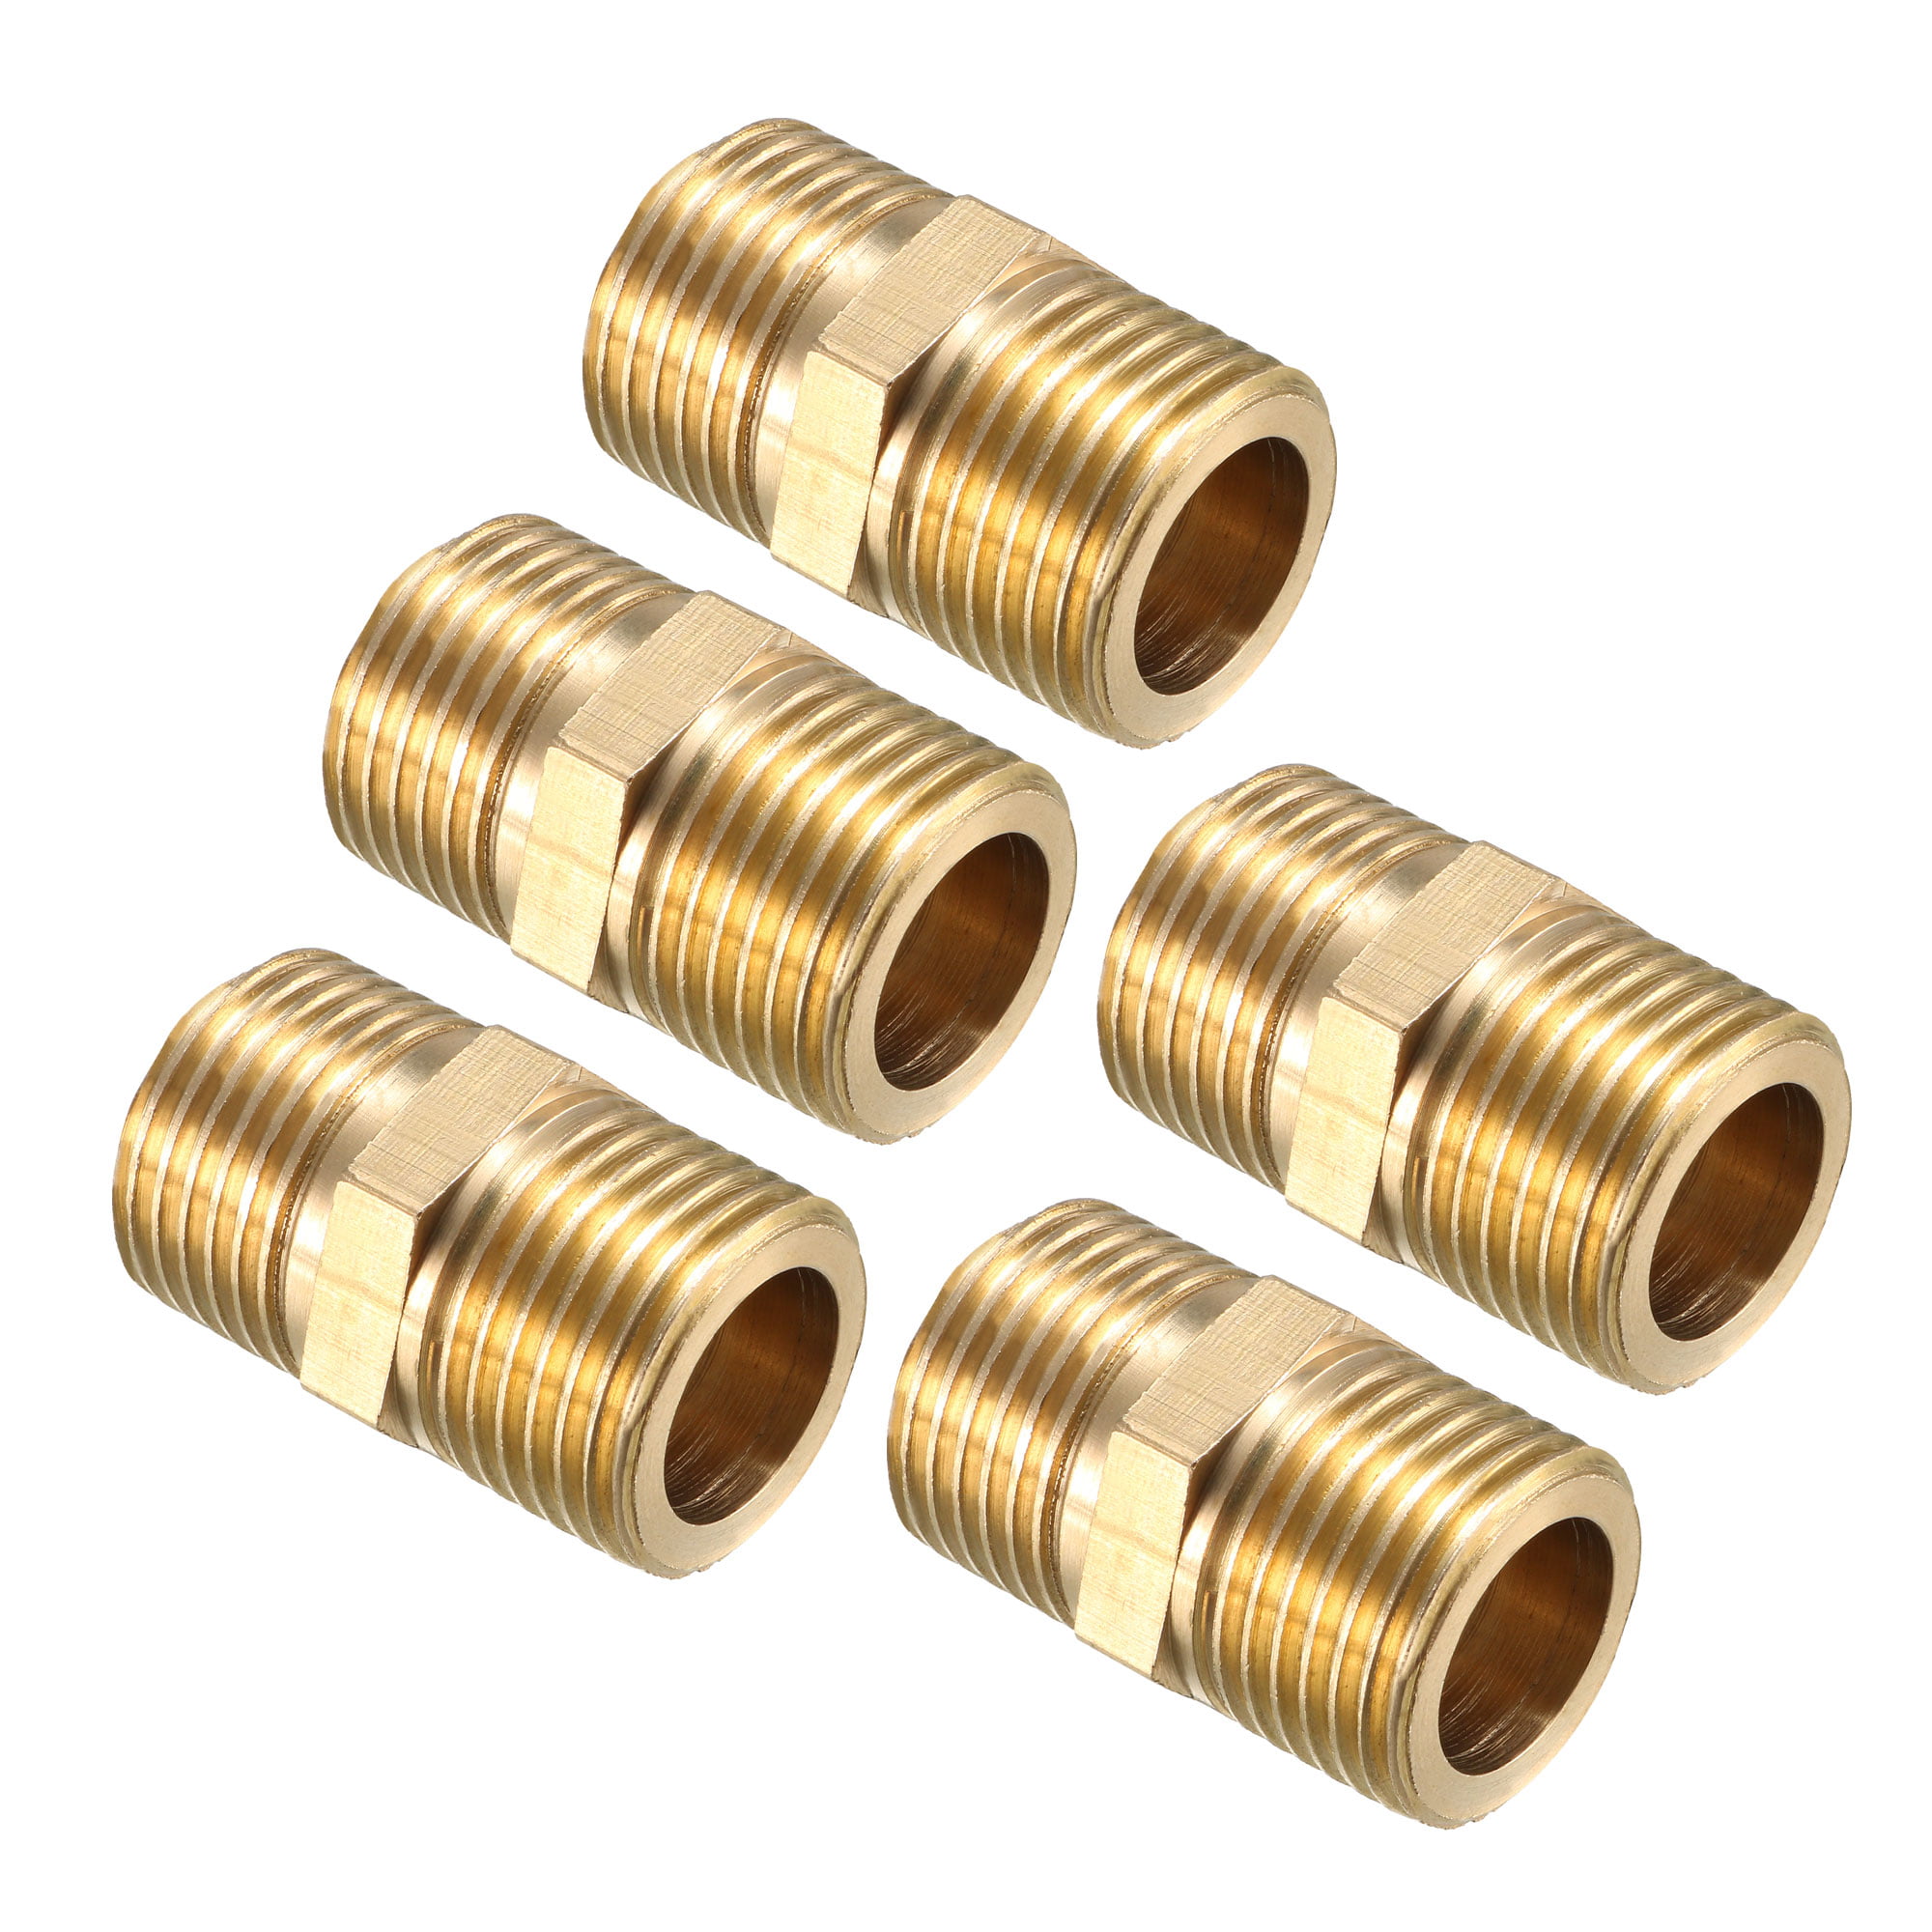 Pack of 2 1/2 X 1/2 NPT Brass Nipple Pipe Fittings Equal Adapter Union Male Threaded Hex Straight Connector Couplings Hose Extender 